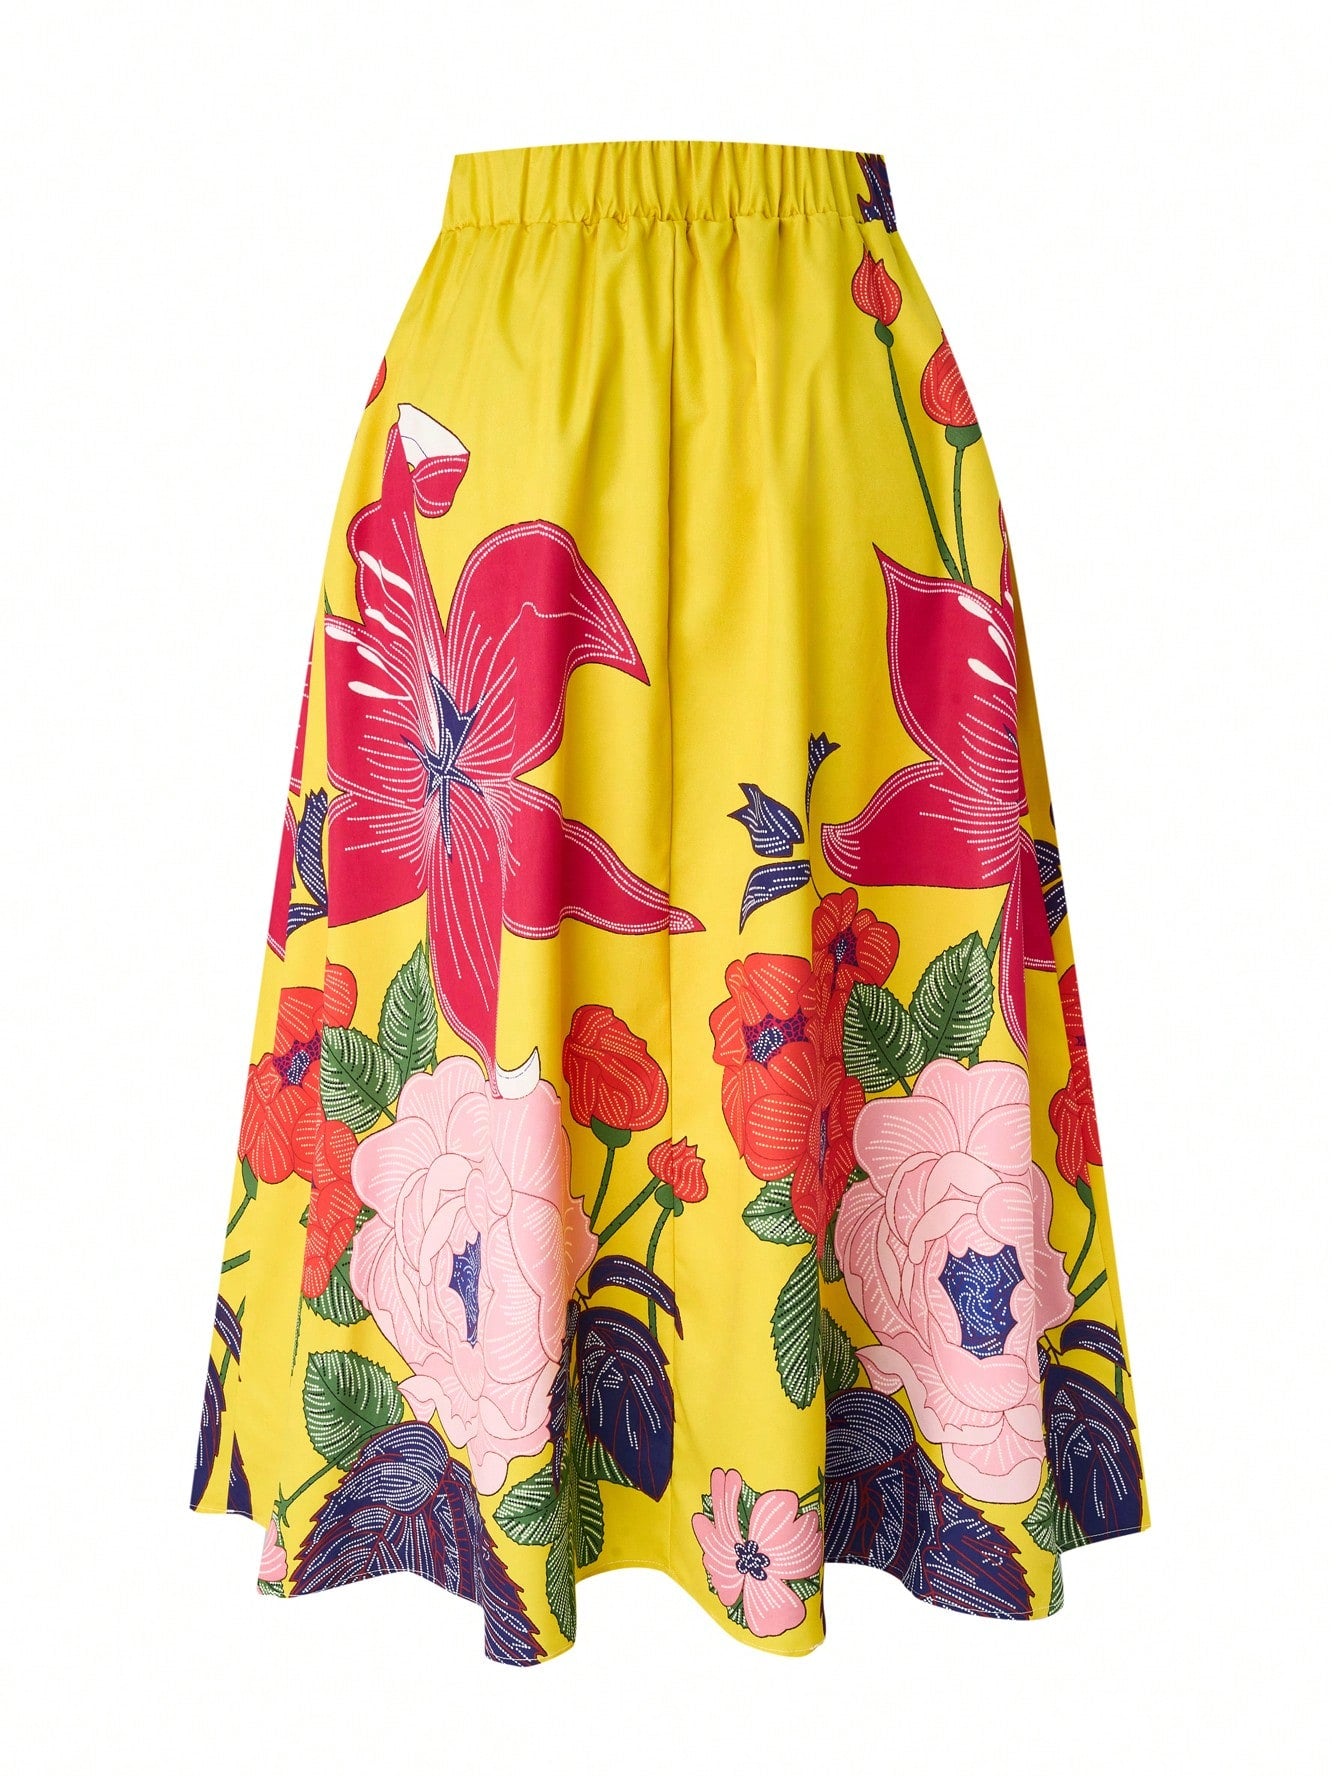 Plus Size Floral Printed Skirt